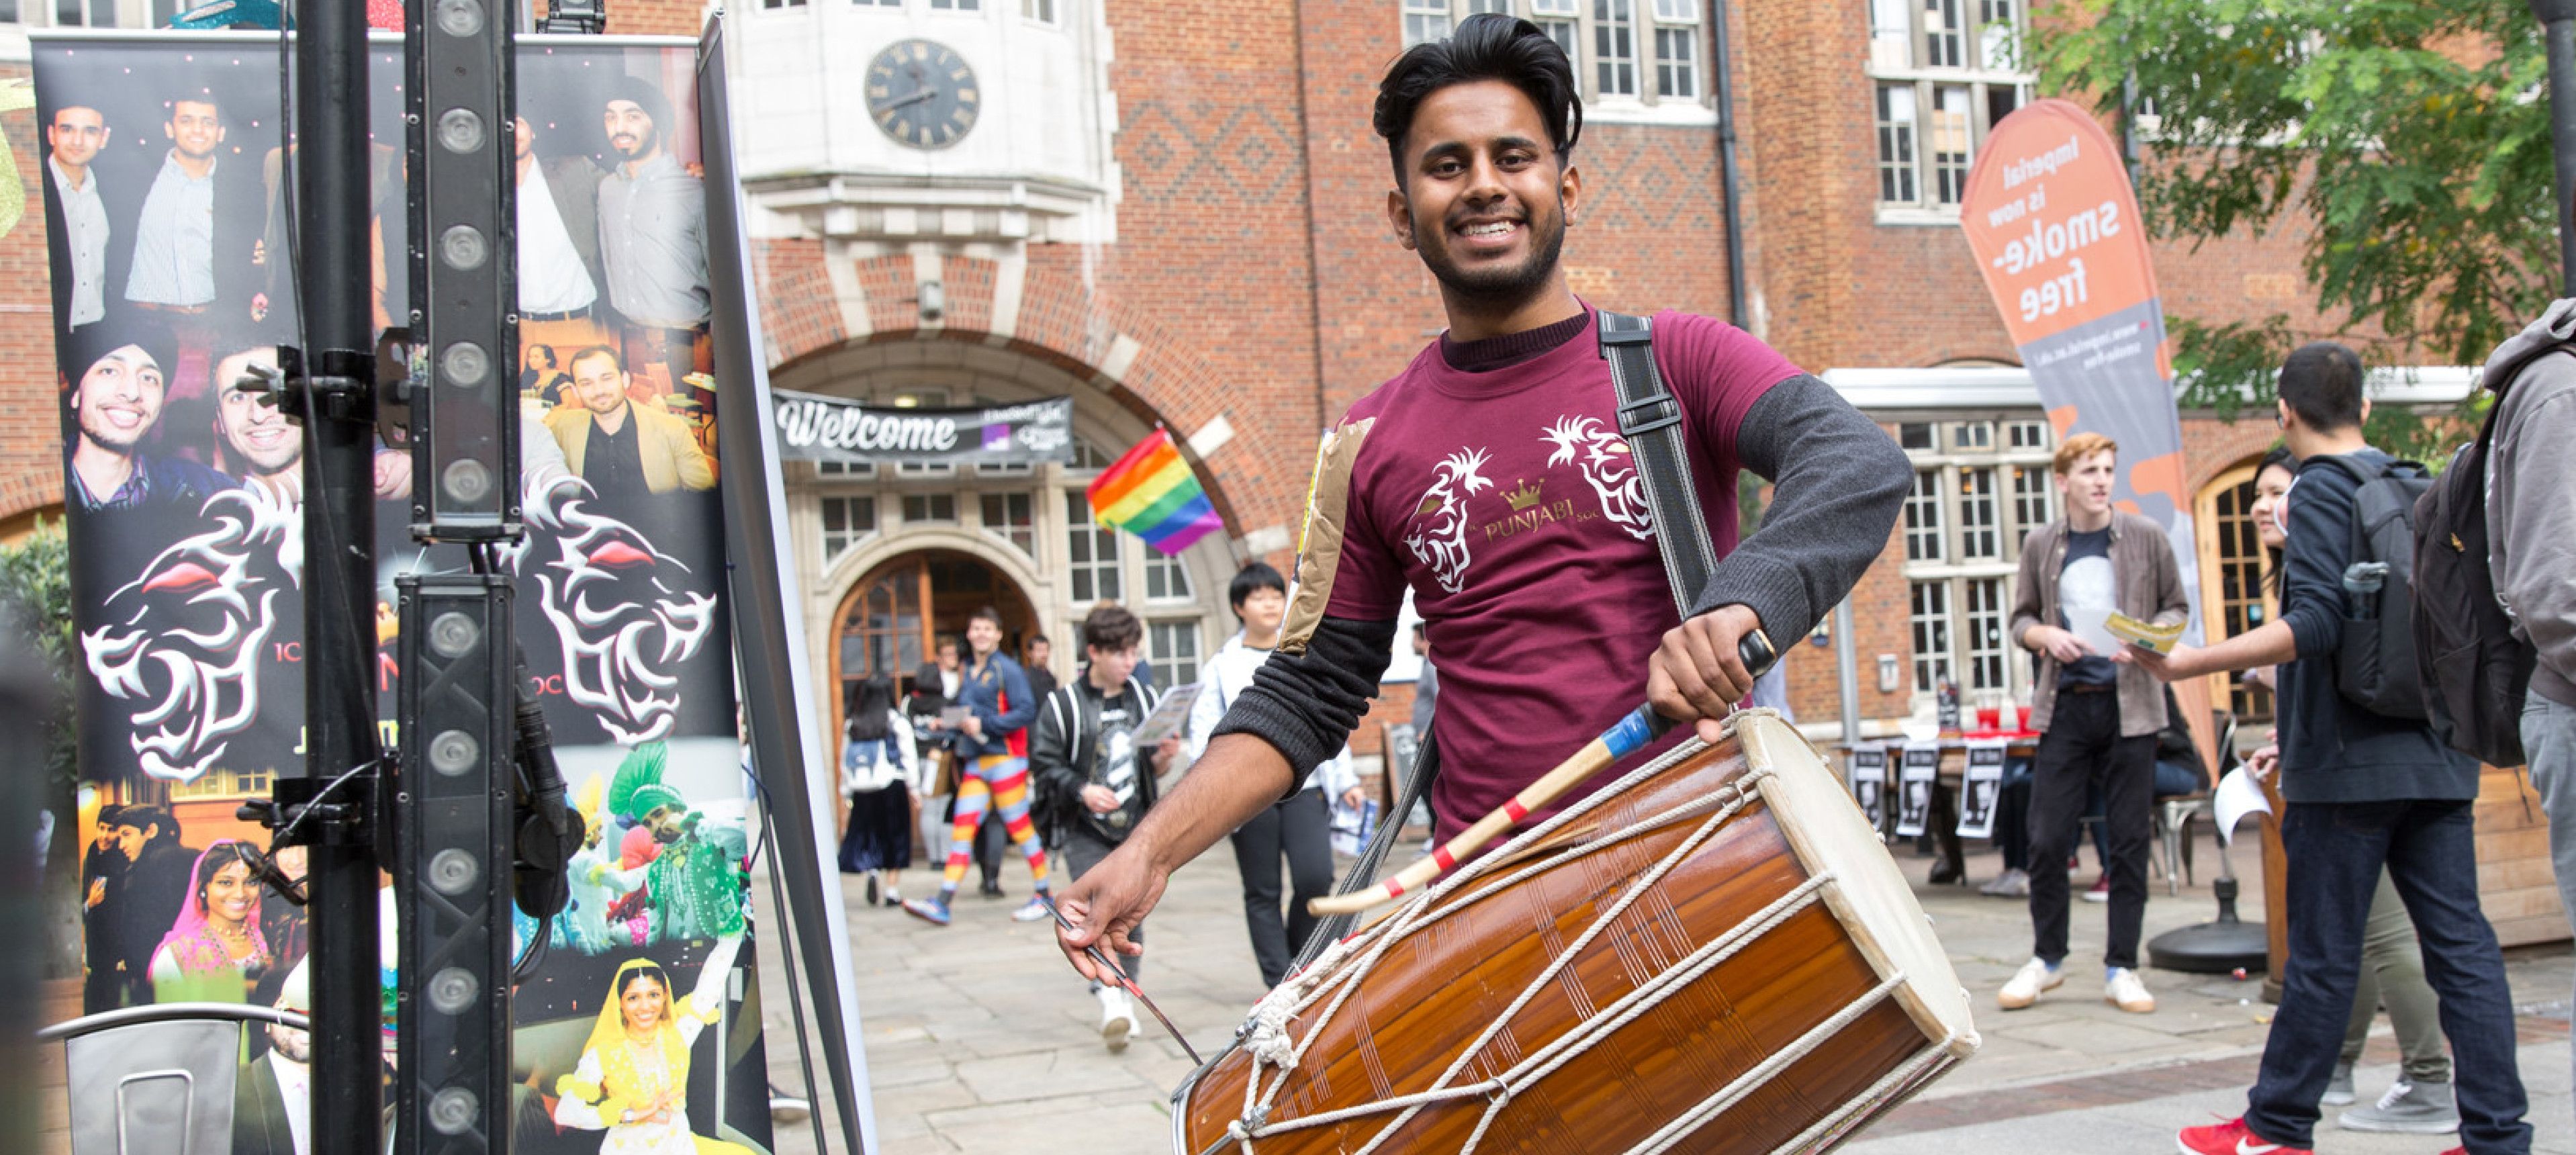 A student playing a drum at Imperial College London Welcome Fair